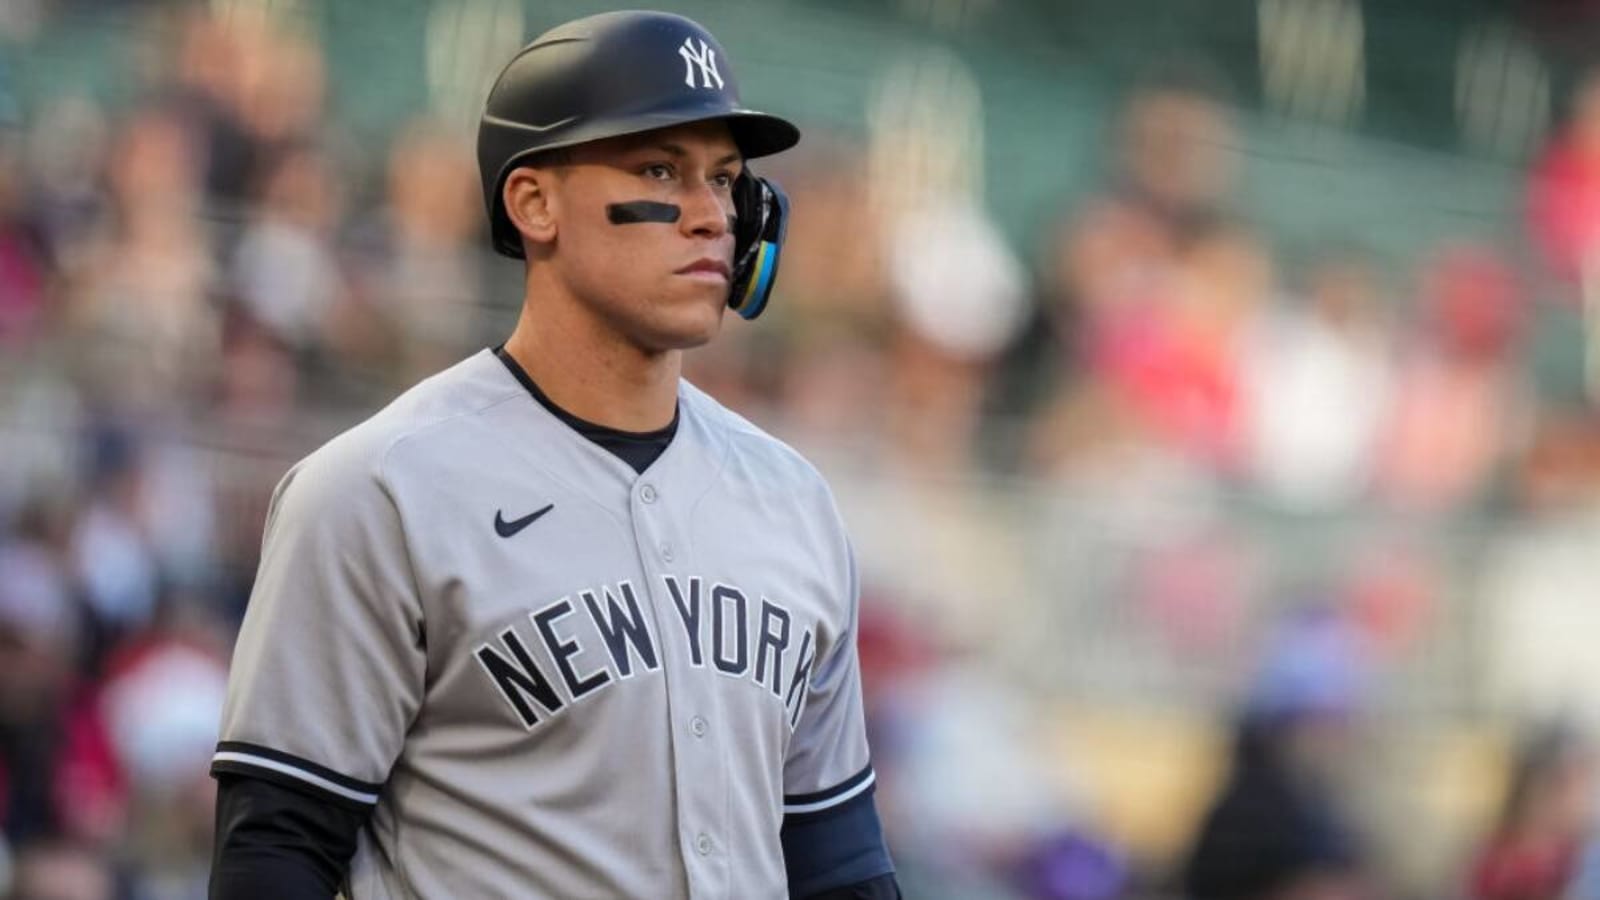 Aaron Judge has ‘choice words’ that Blue Jays broadcast suggested he was cheating